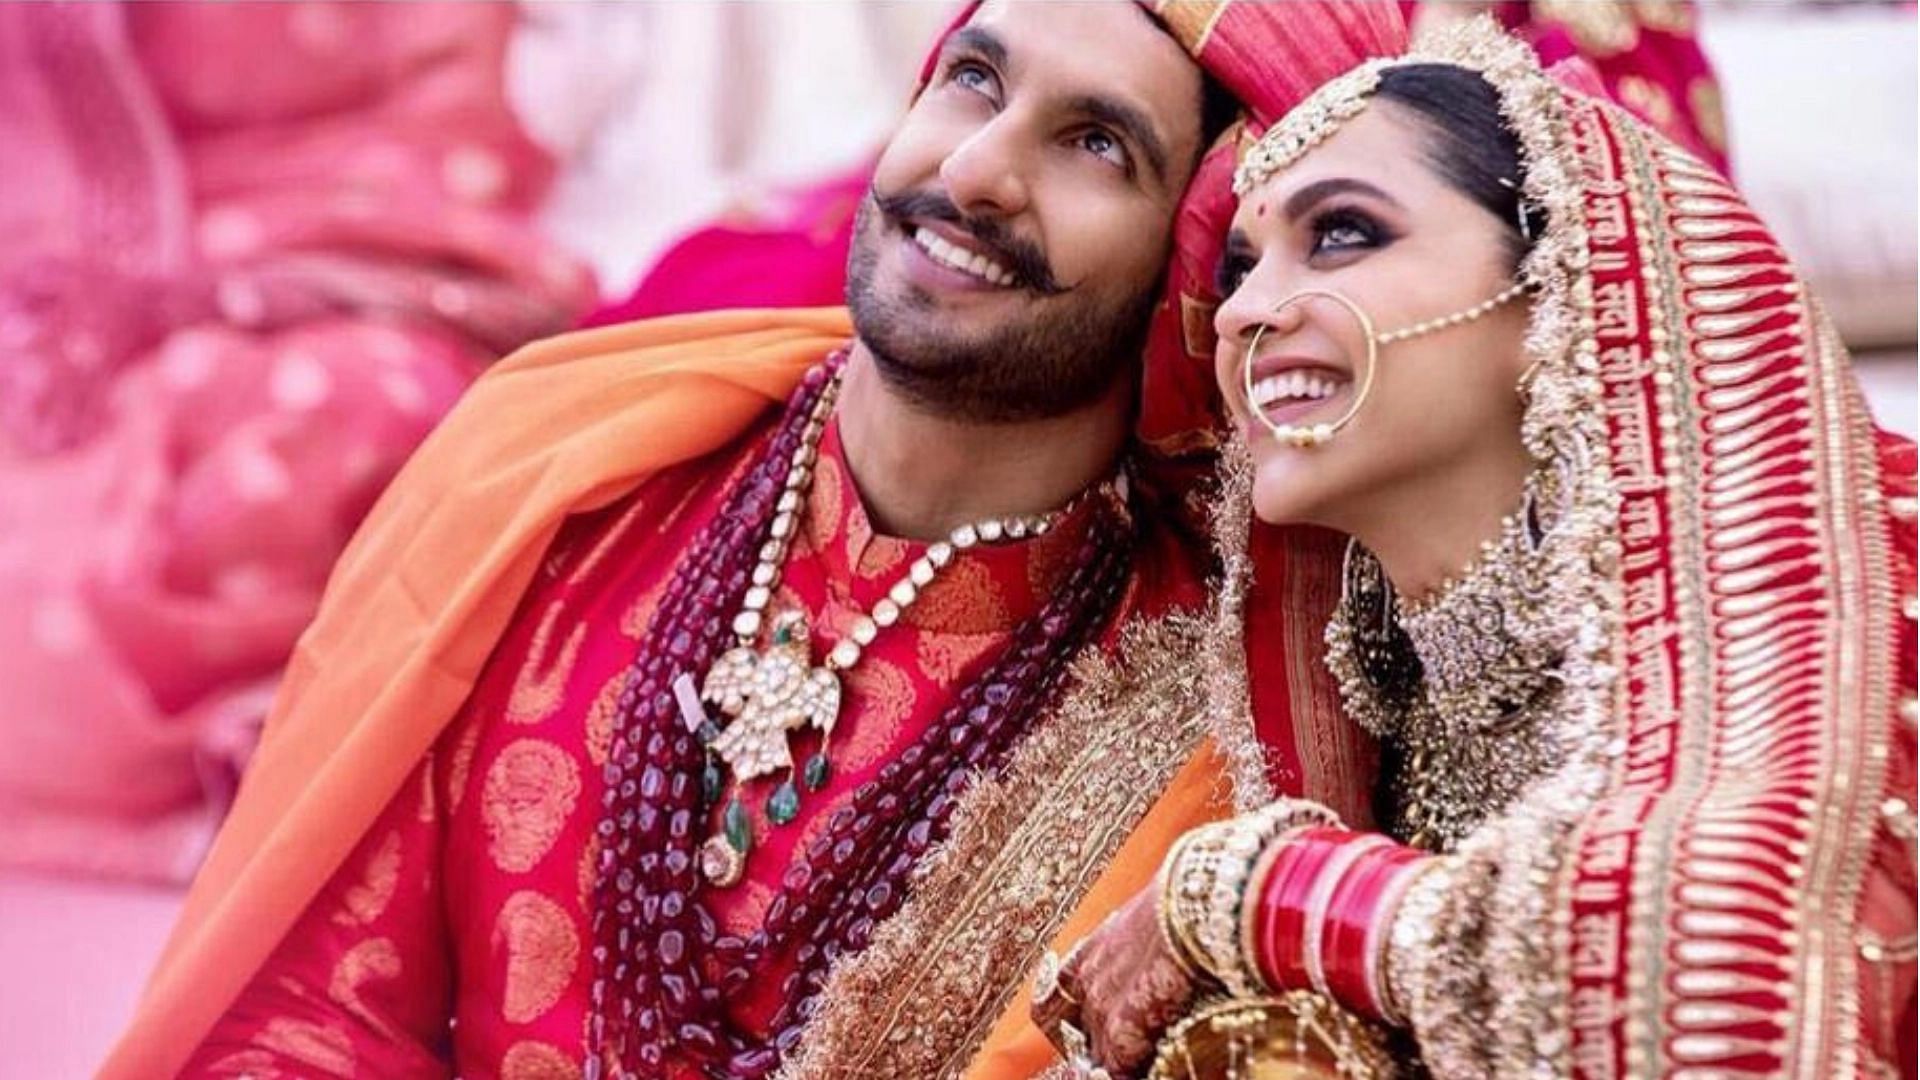 Over the past six years, #DeepVeer have made picture perfect memories.&nbsp;